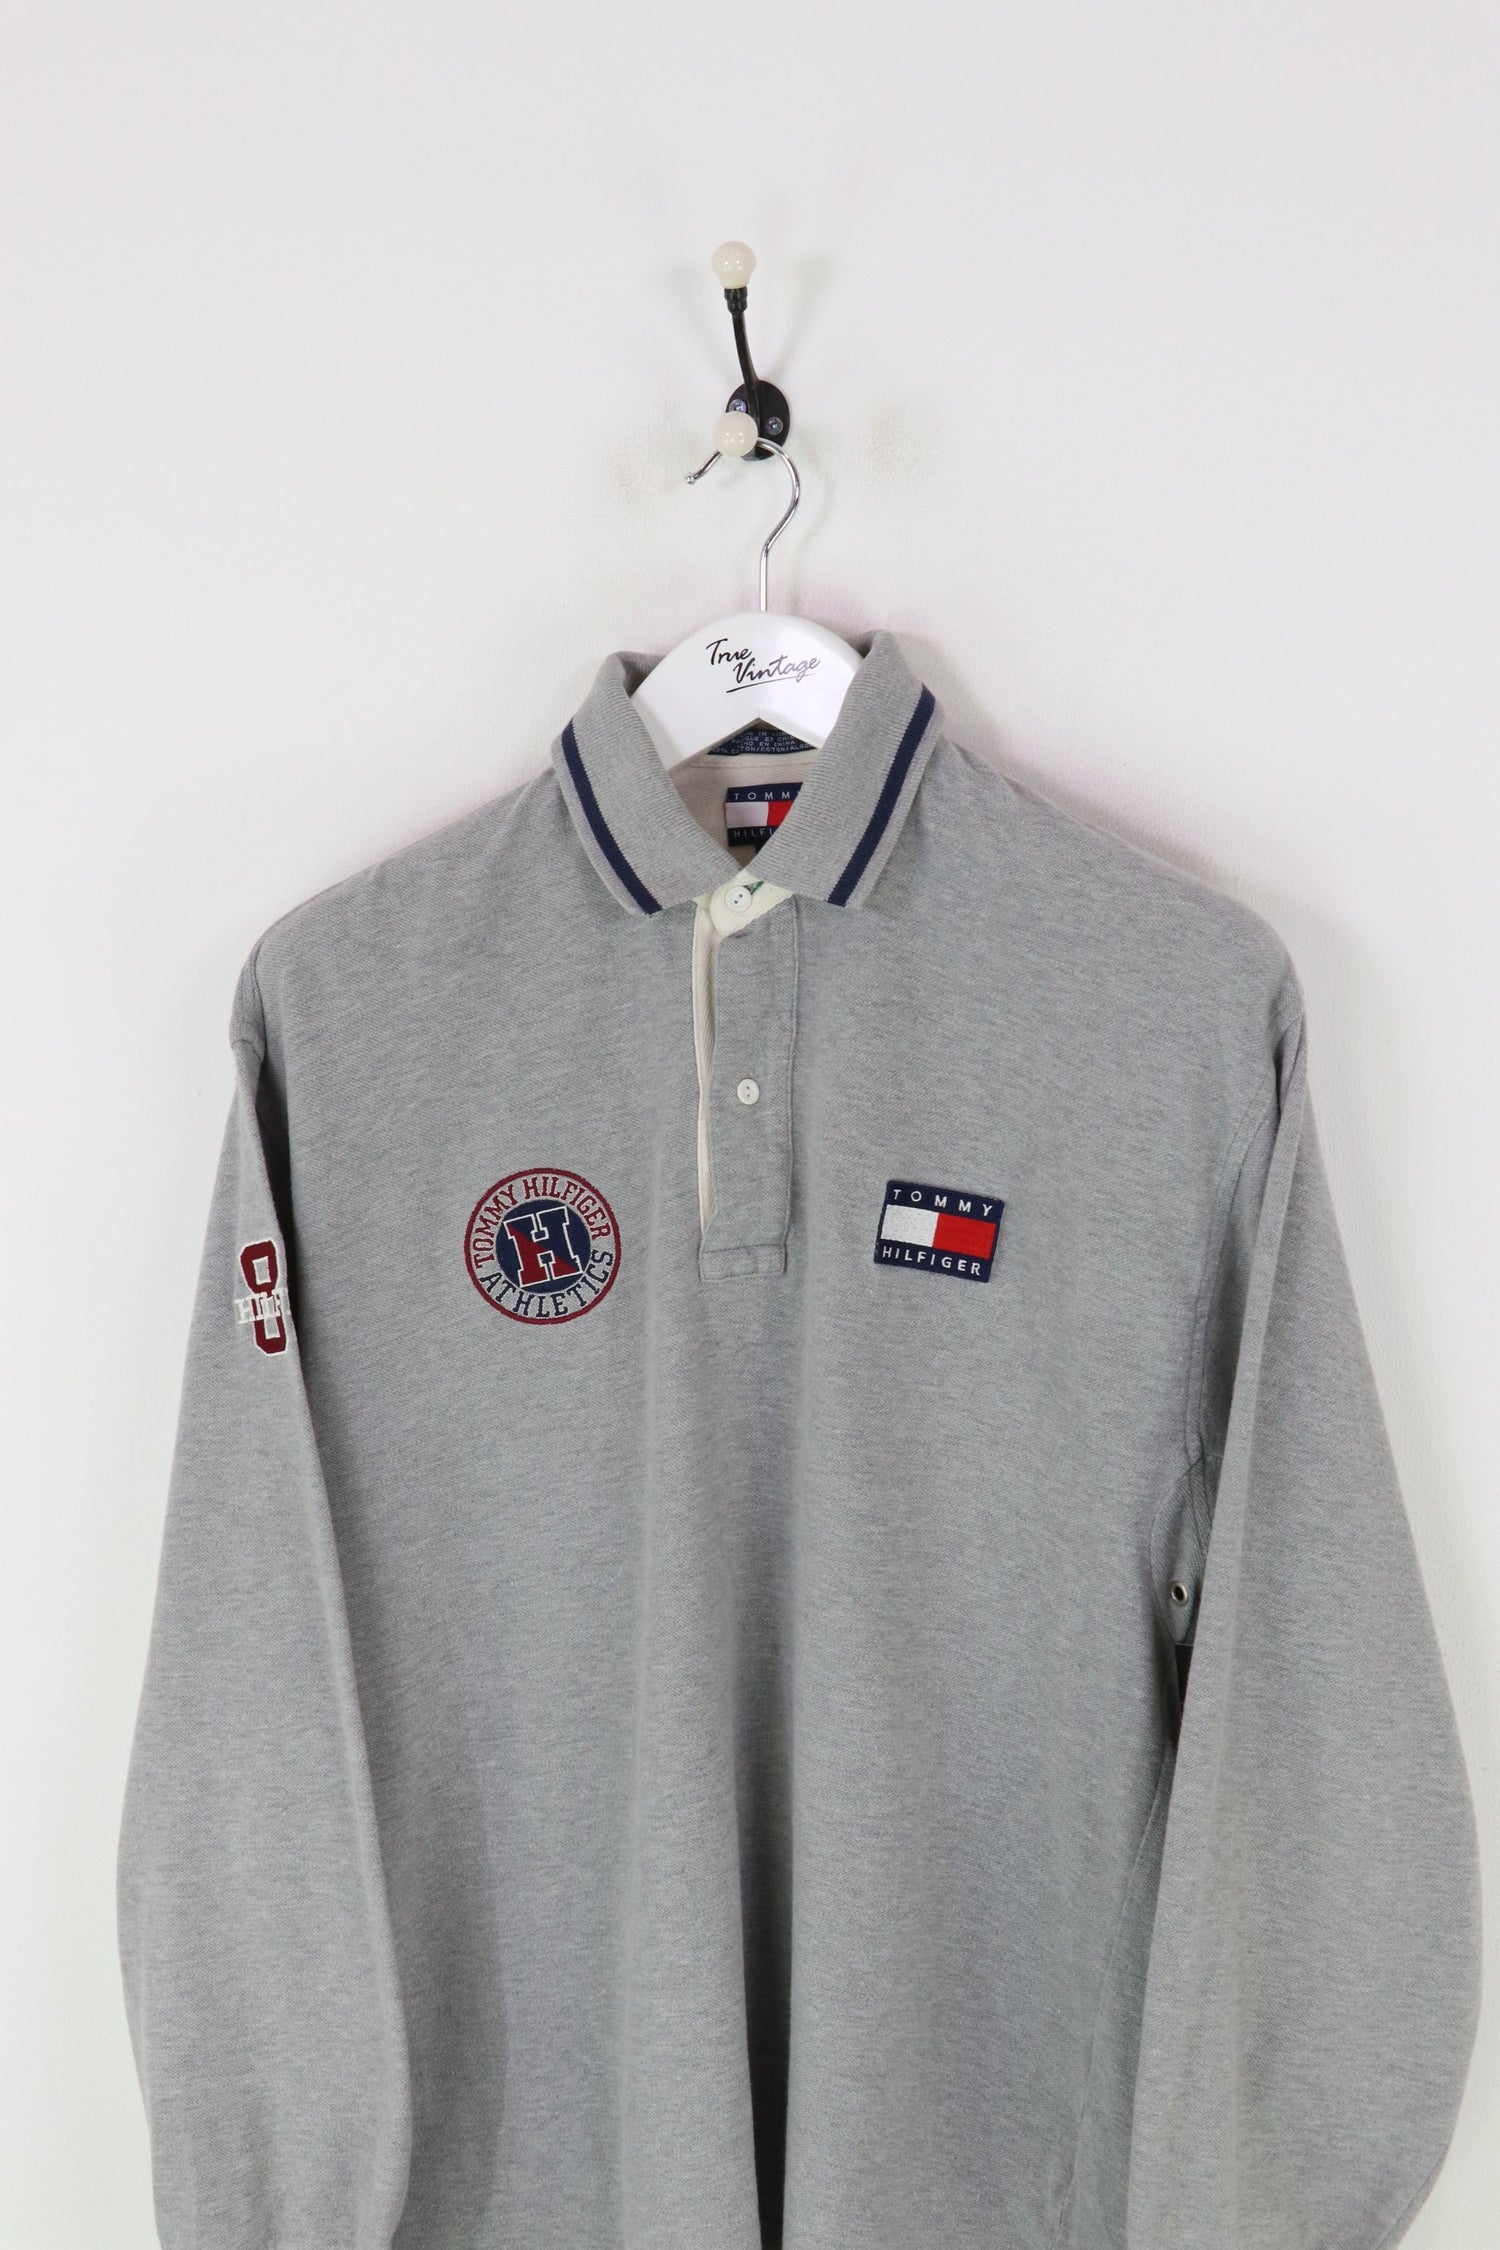 Tommy Hilfiger Rowing L/S Polo Shirt Grey Large